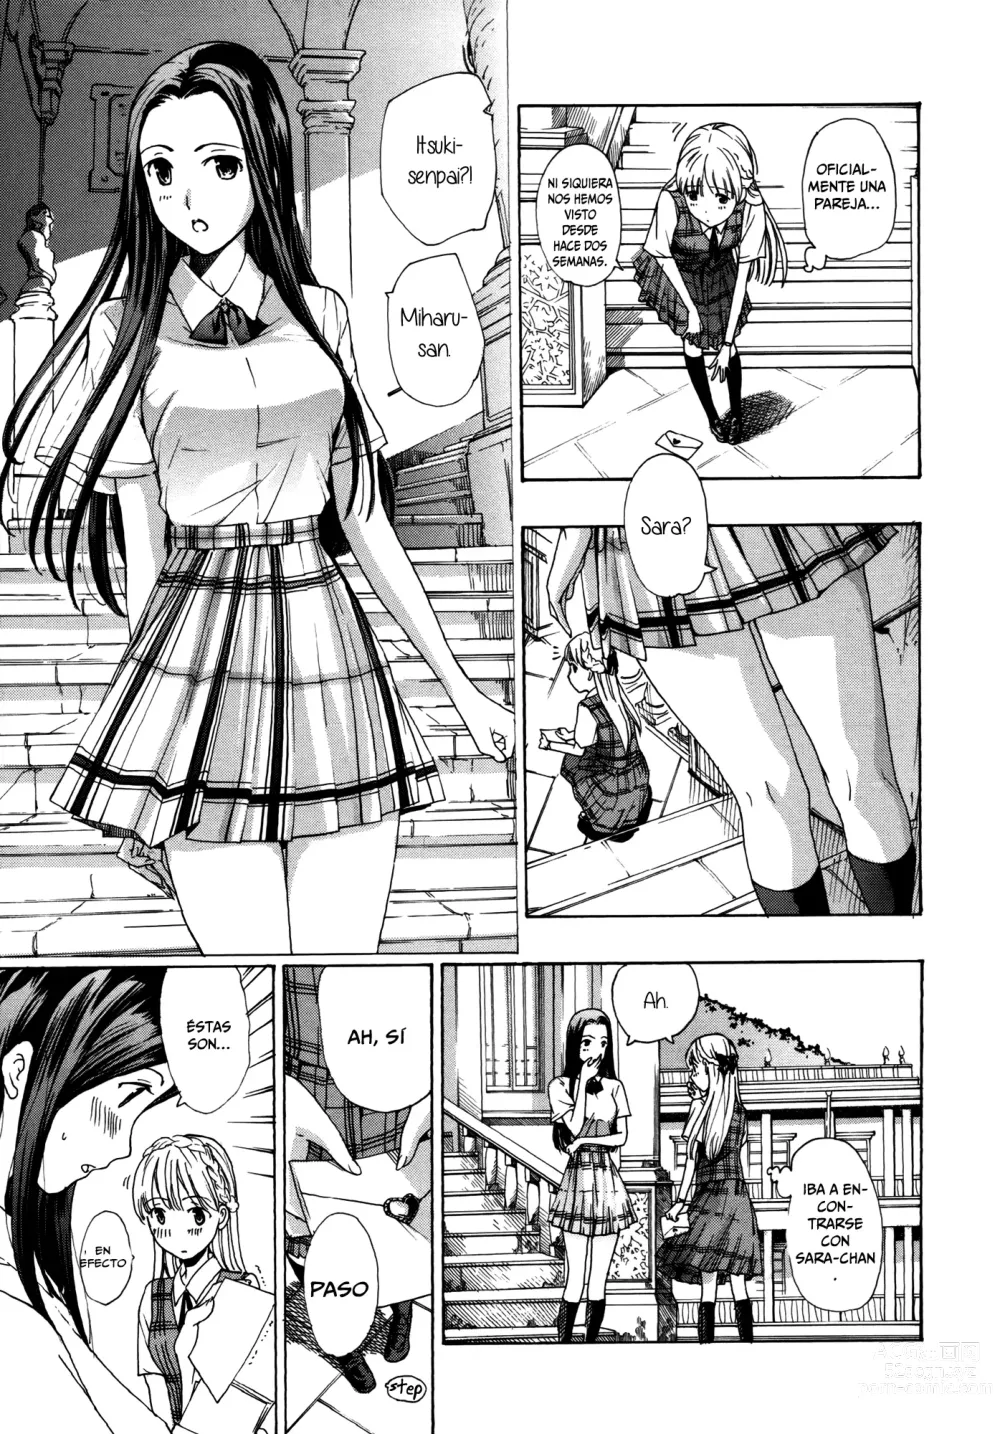 Page 185 of manga Otome Saku. - Maidens bloom in the garden in the sky